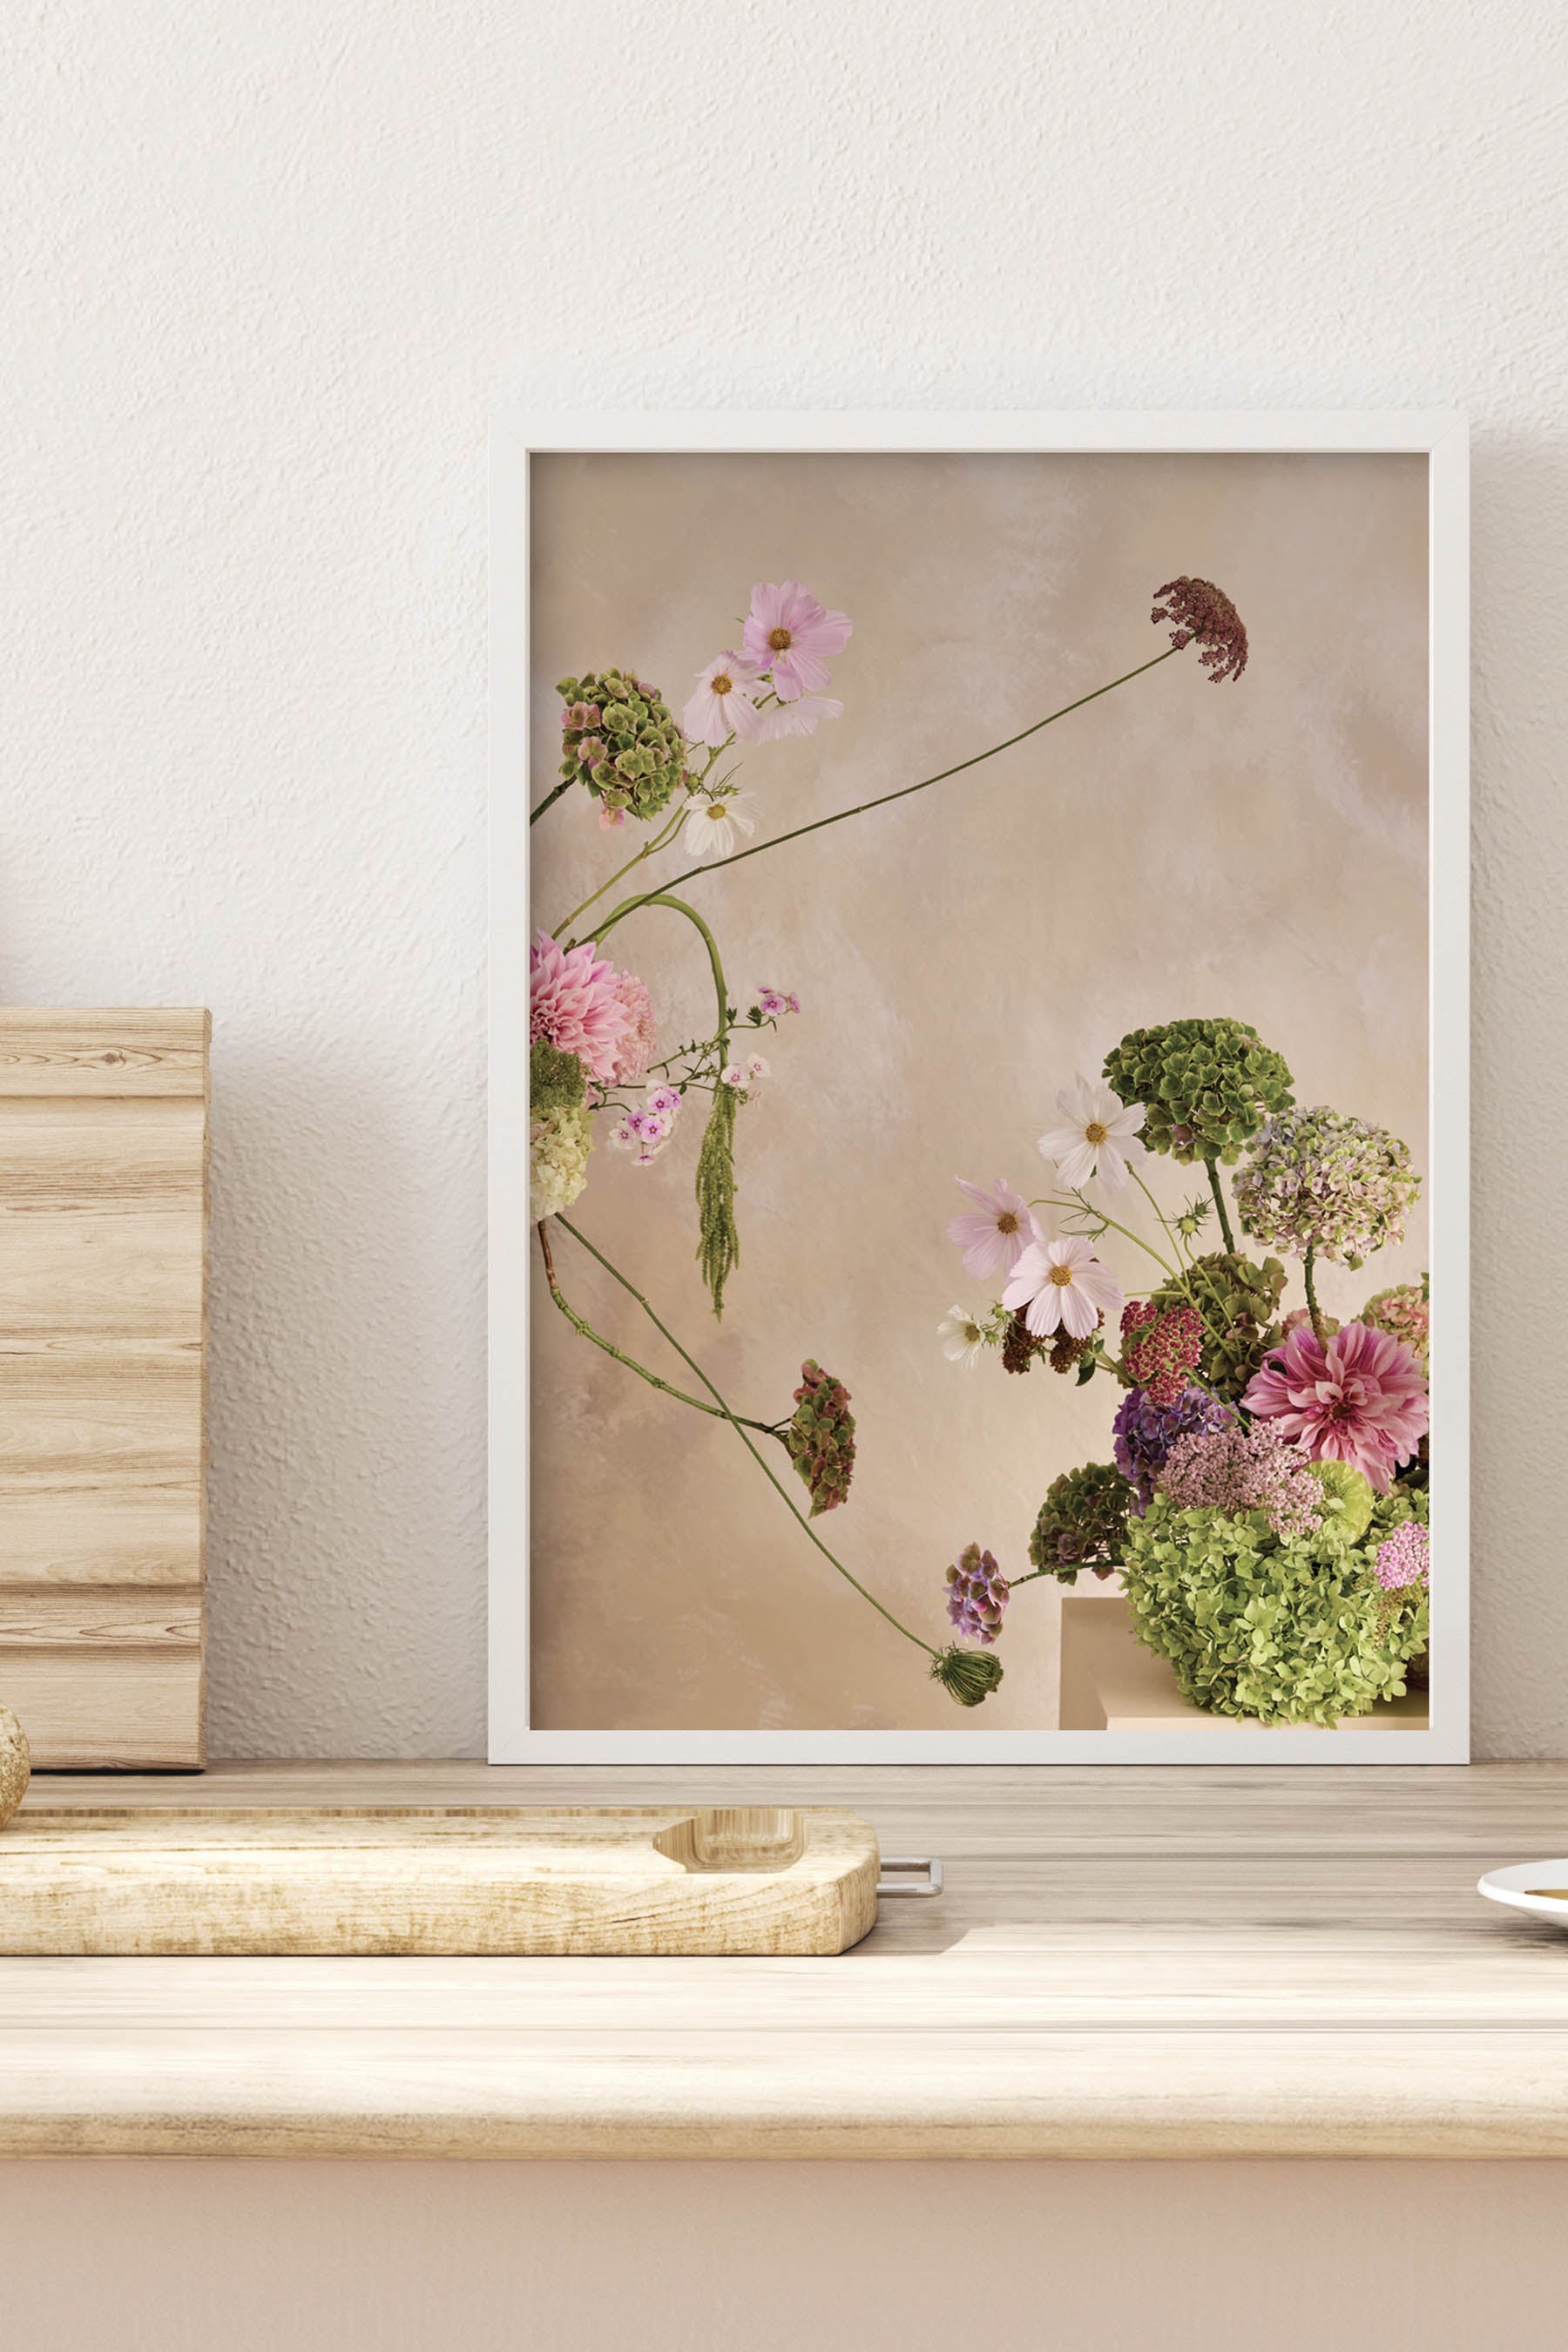 Whimsical Floral Abstract Arrangement against a Linen colour hand painted background Fine Art Print By Austin Bloom A3 Size framed in White in a oak kitchen.